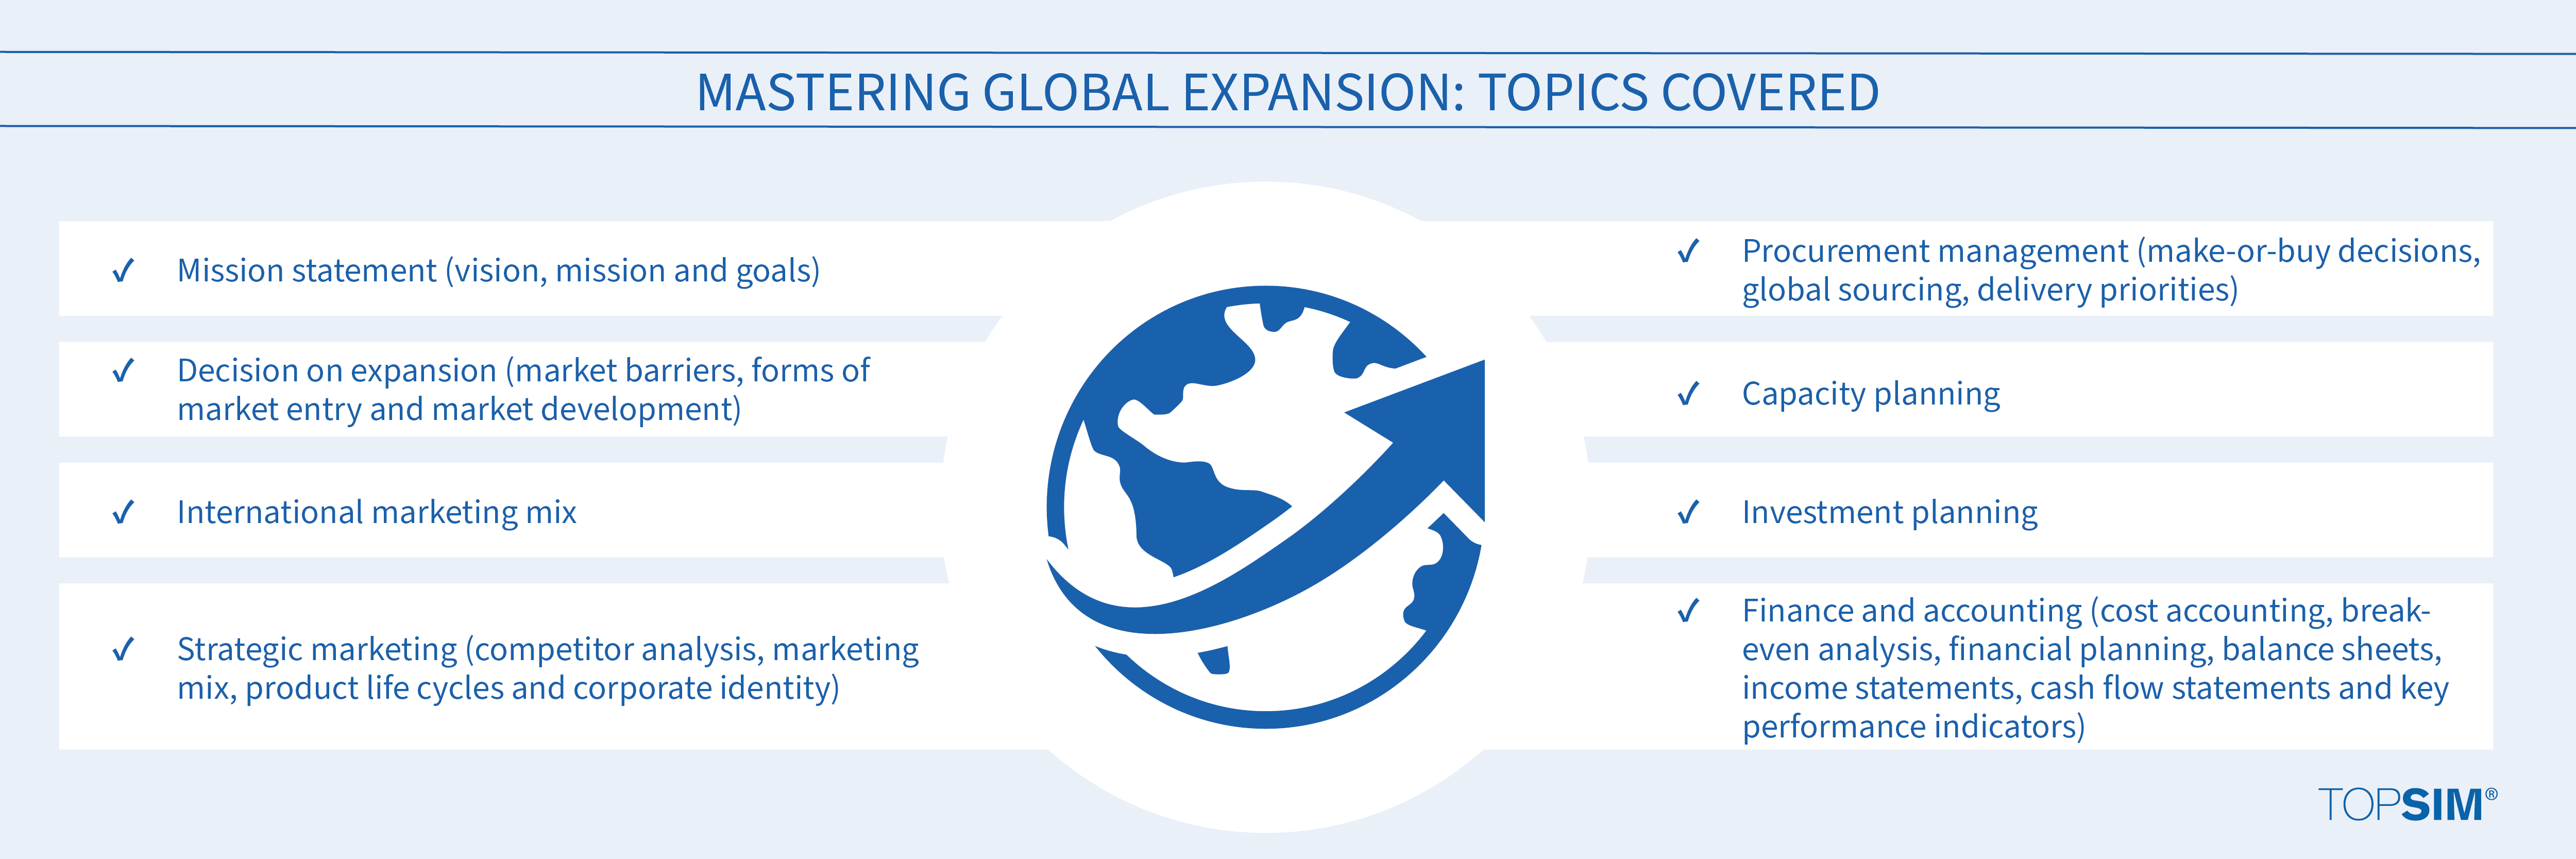 Topics covered: Mastering Global Expansion